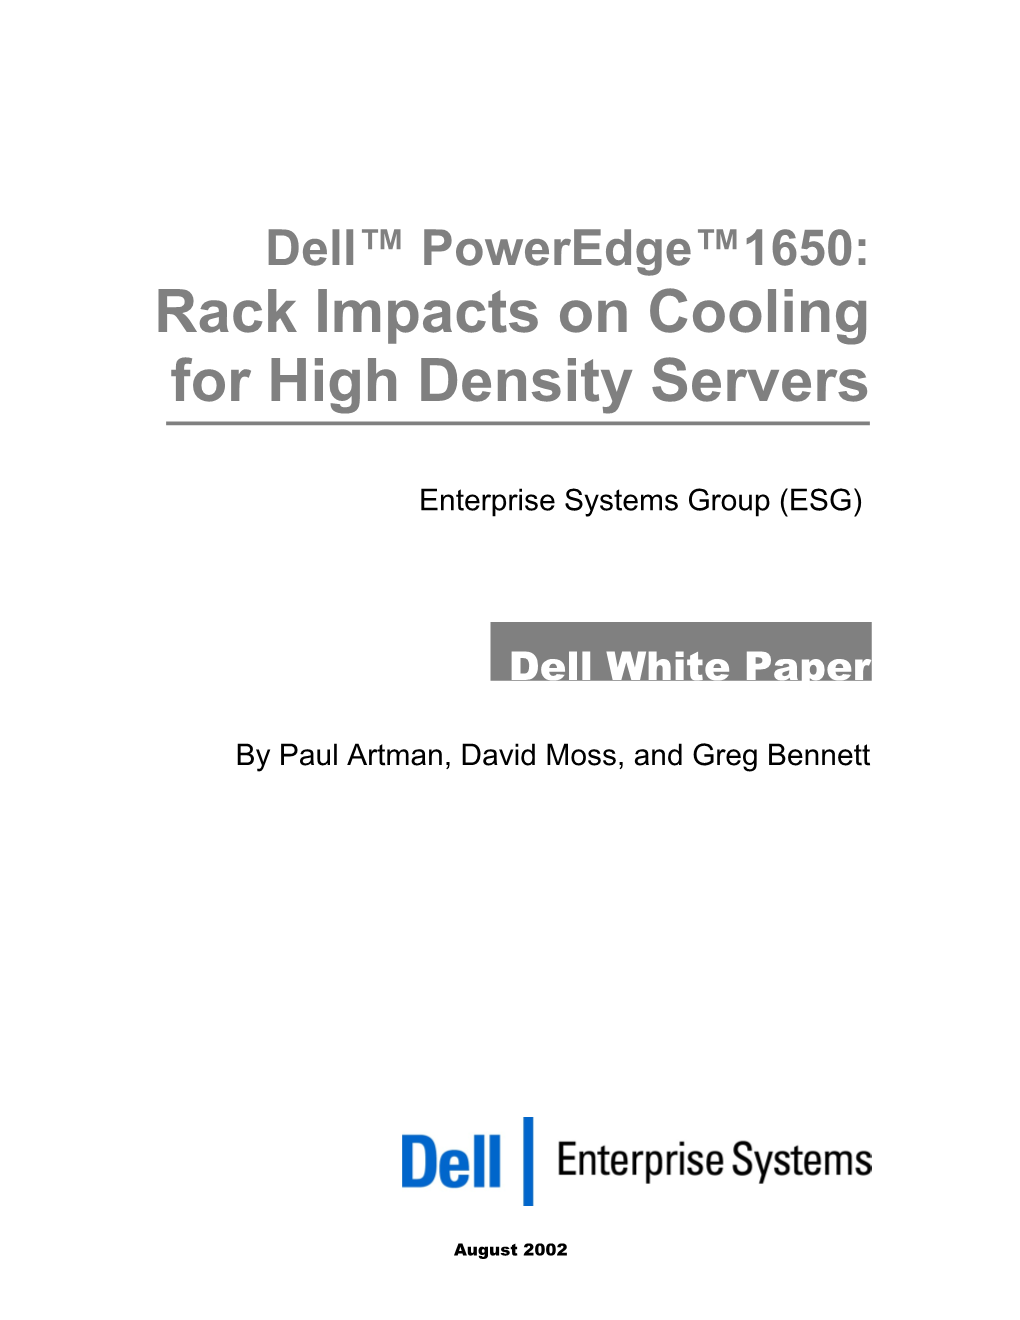 Rack Impacts On Cooling For High Density Servers